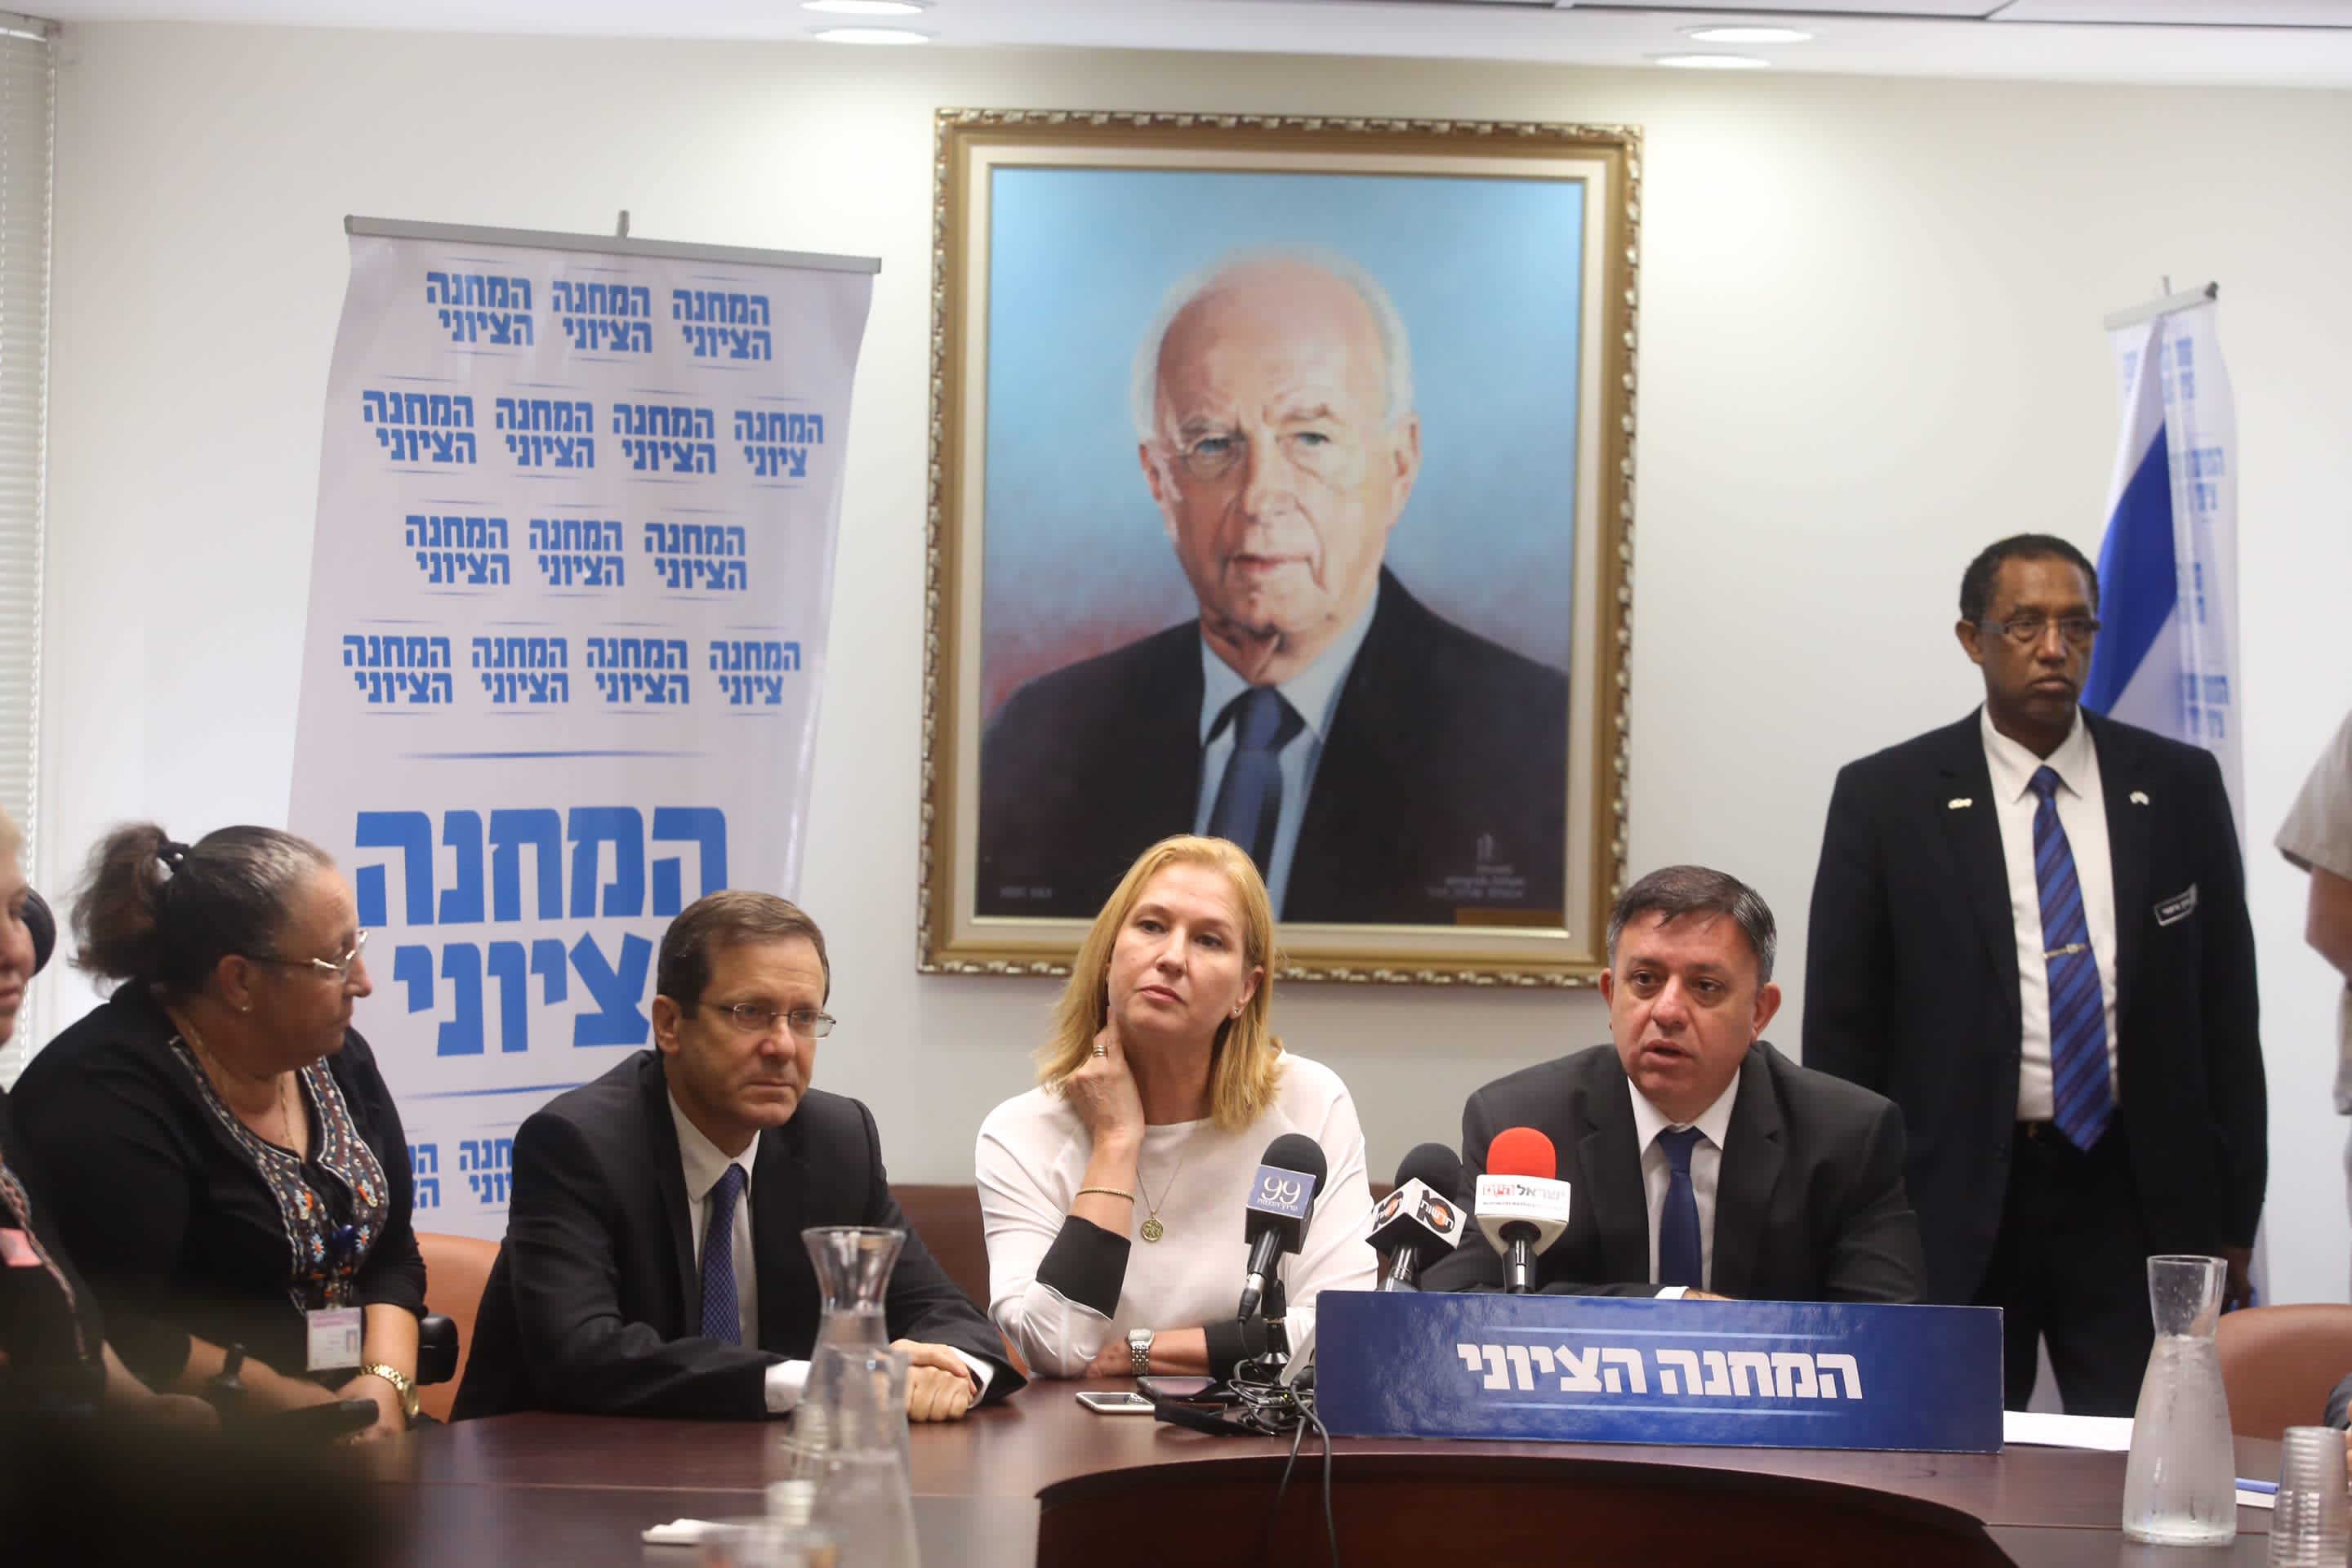 Handicap activists meet with the Zionist Union party ahead of the Knesset plenum to discuss goverment allowances for the handicap, September 18, 2017. (Marc Israel Sellem/The Jerusalem Post)